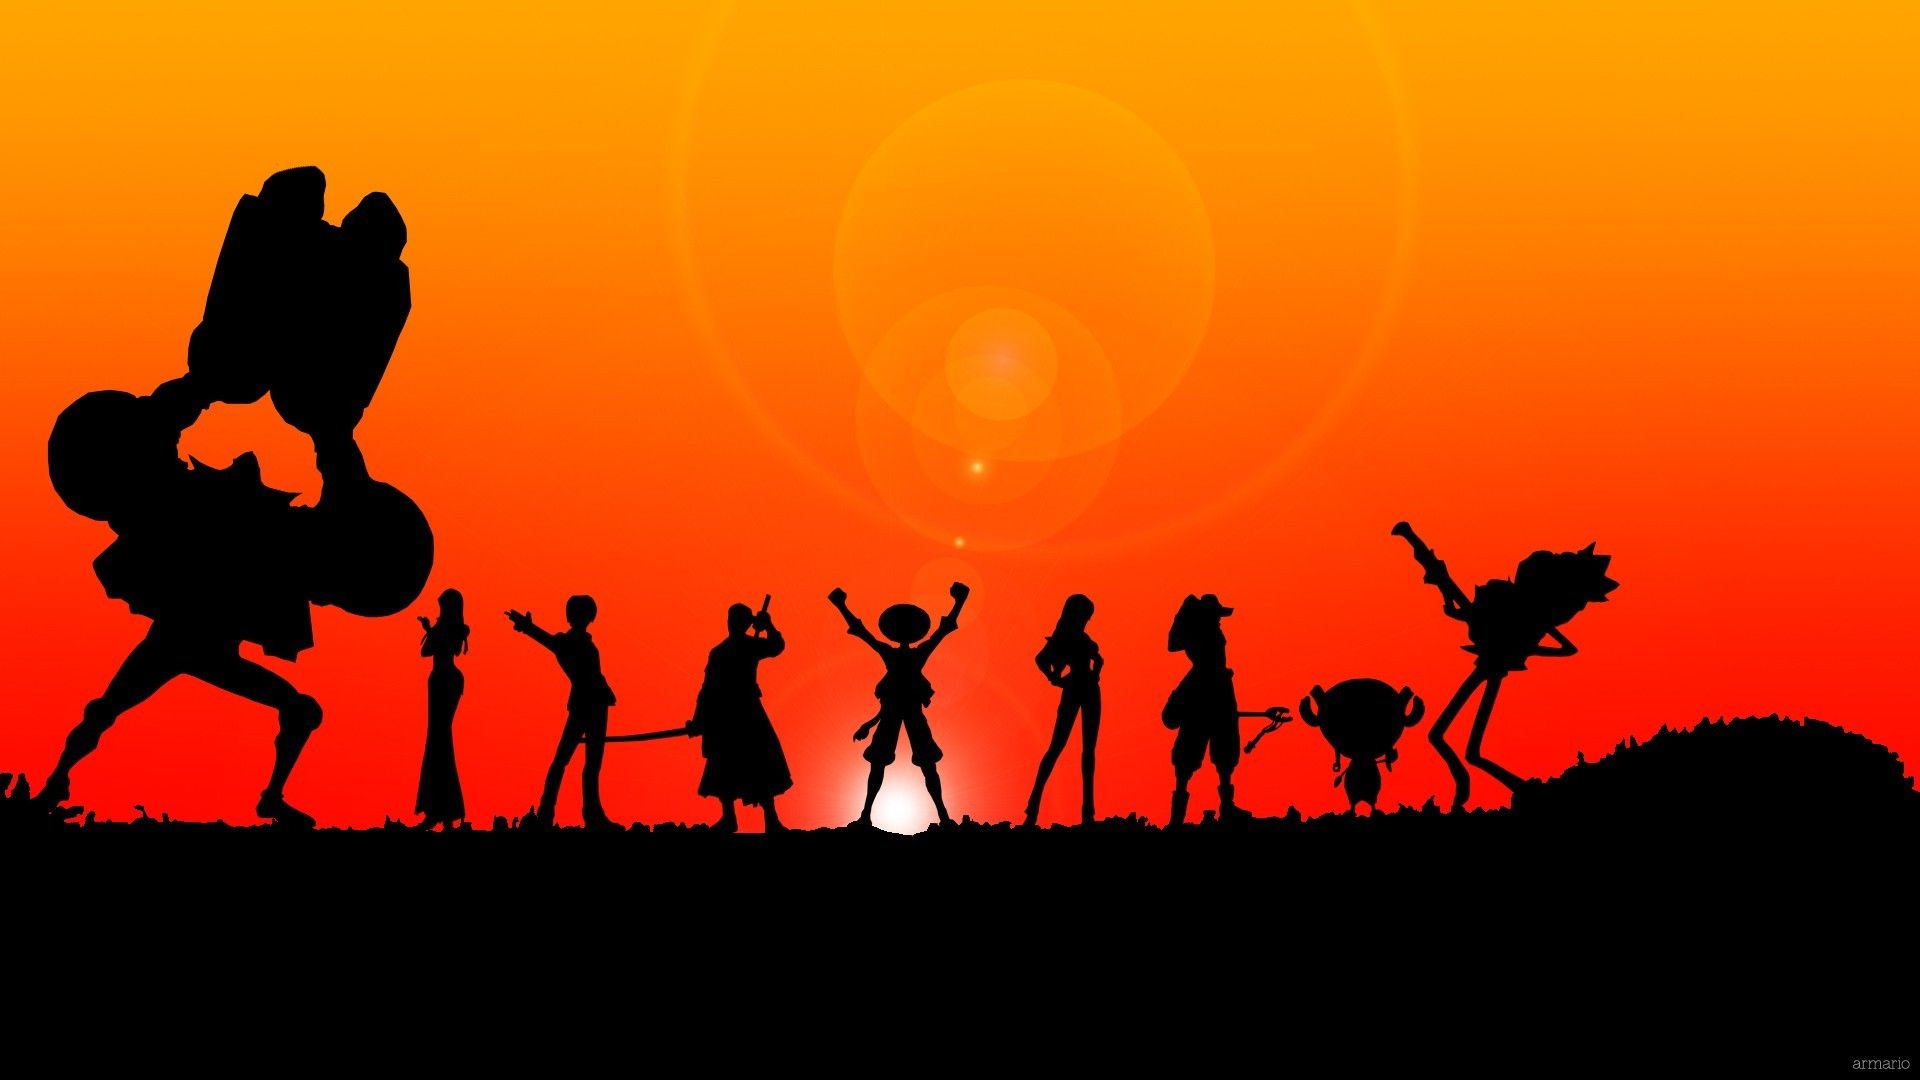 Wallpaper, illustration, sunset, anime, silhouette, One Piece, font 1920x1080